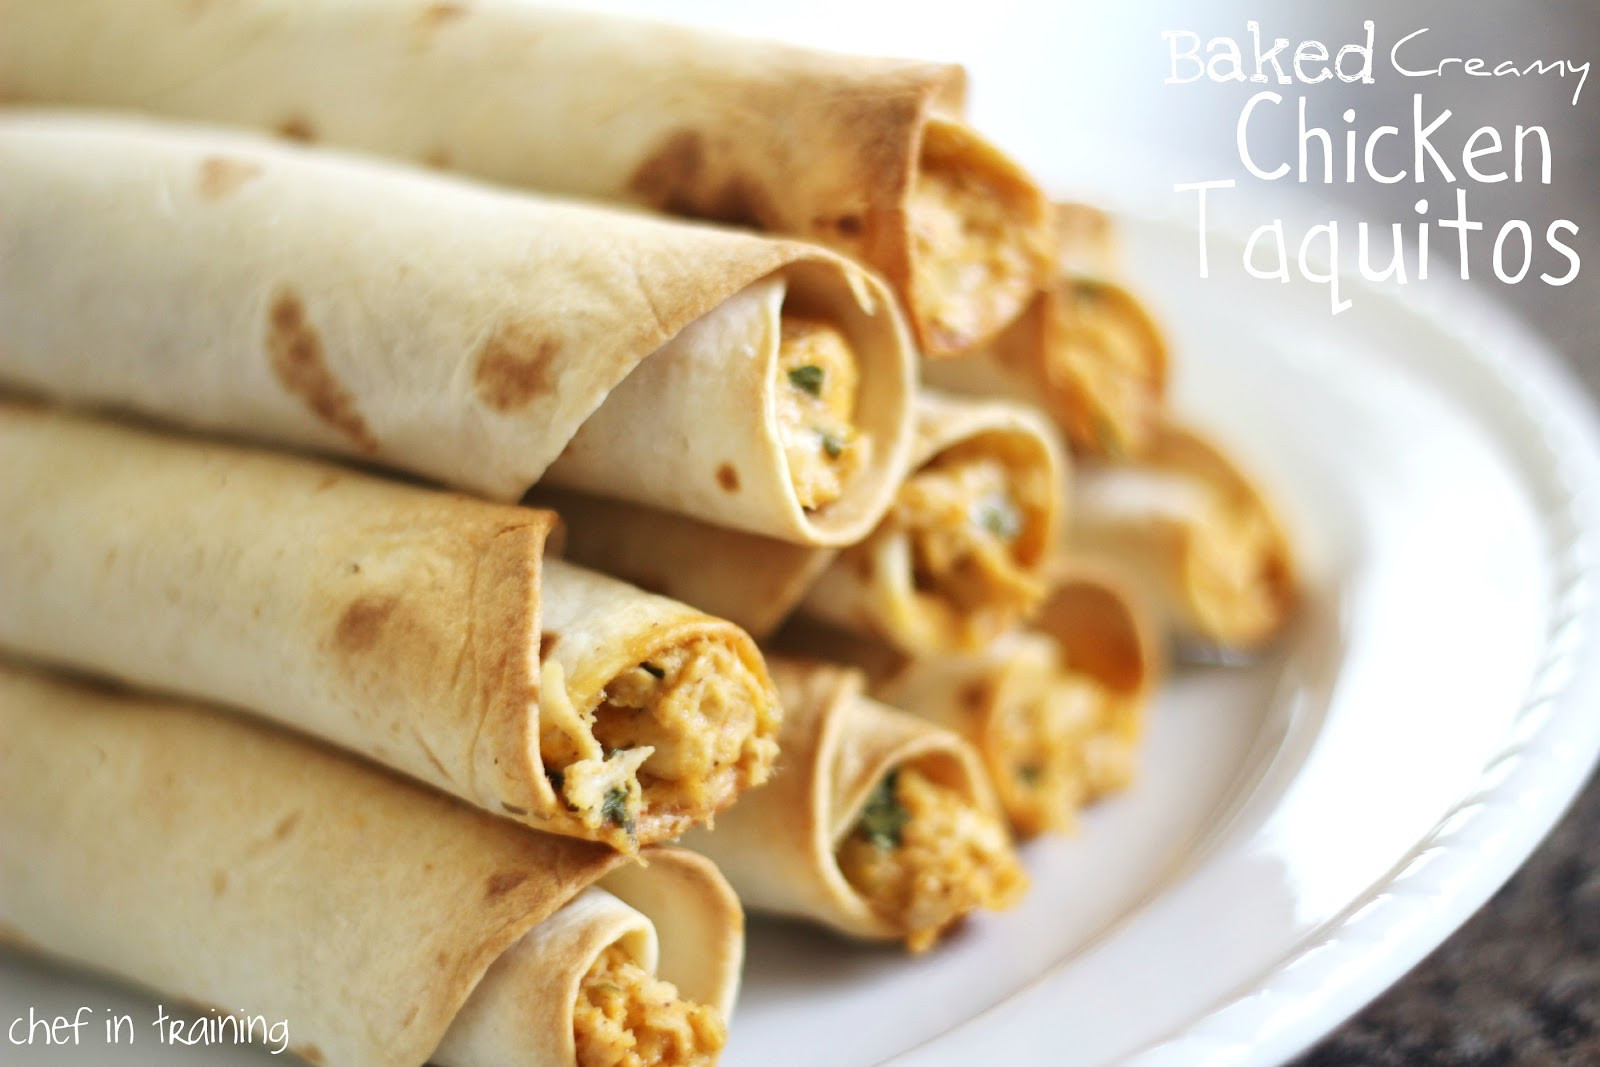 Baked Chicken Taquitos
 Baked Creamy Chicken Taquitos Chef in Training